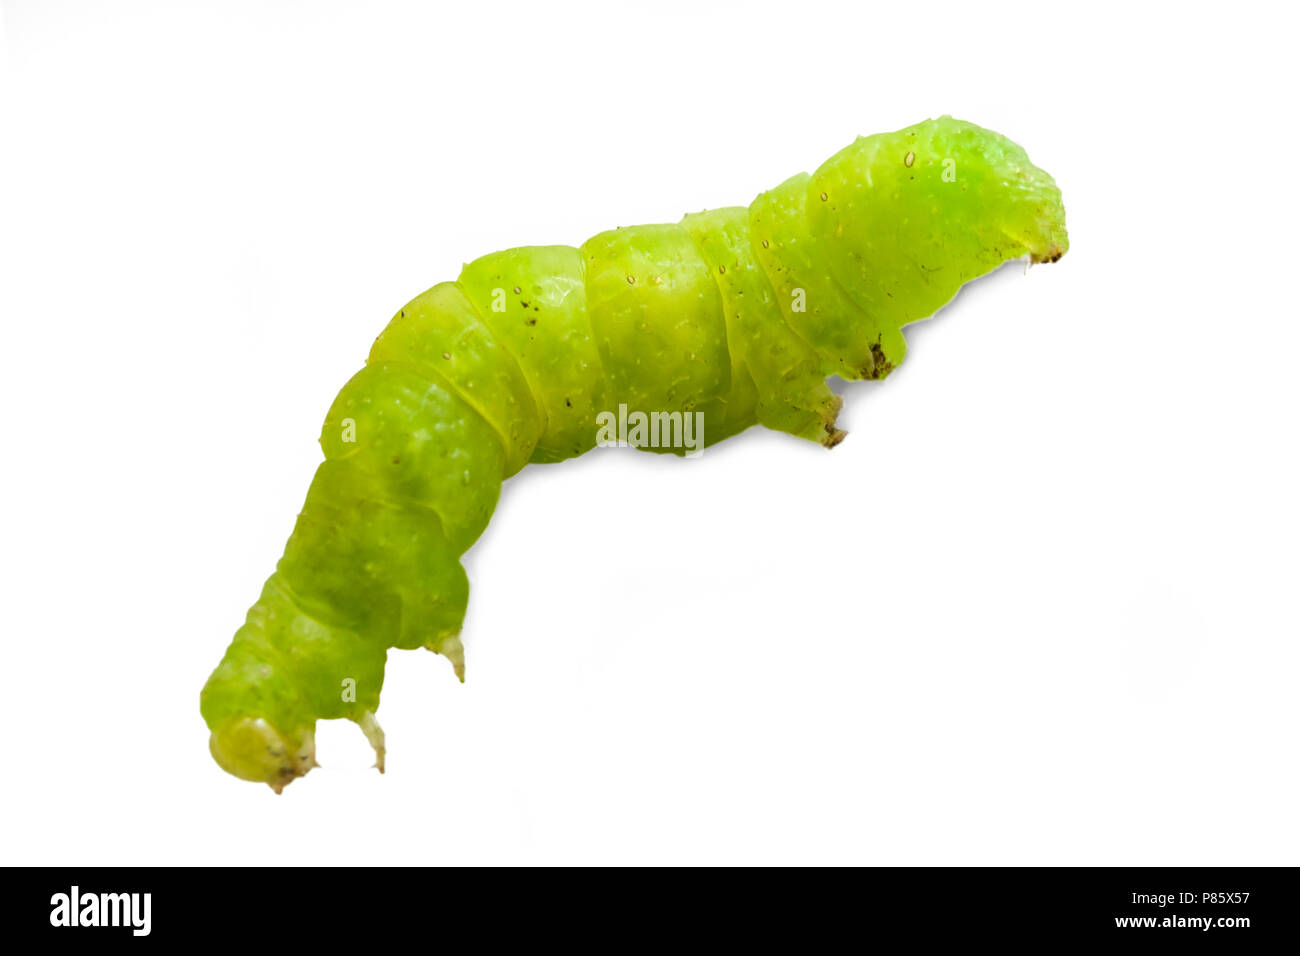 Green ((to be identified) caterpillar isolated on white background Stock Photo